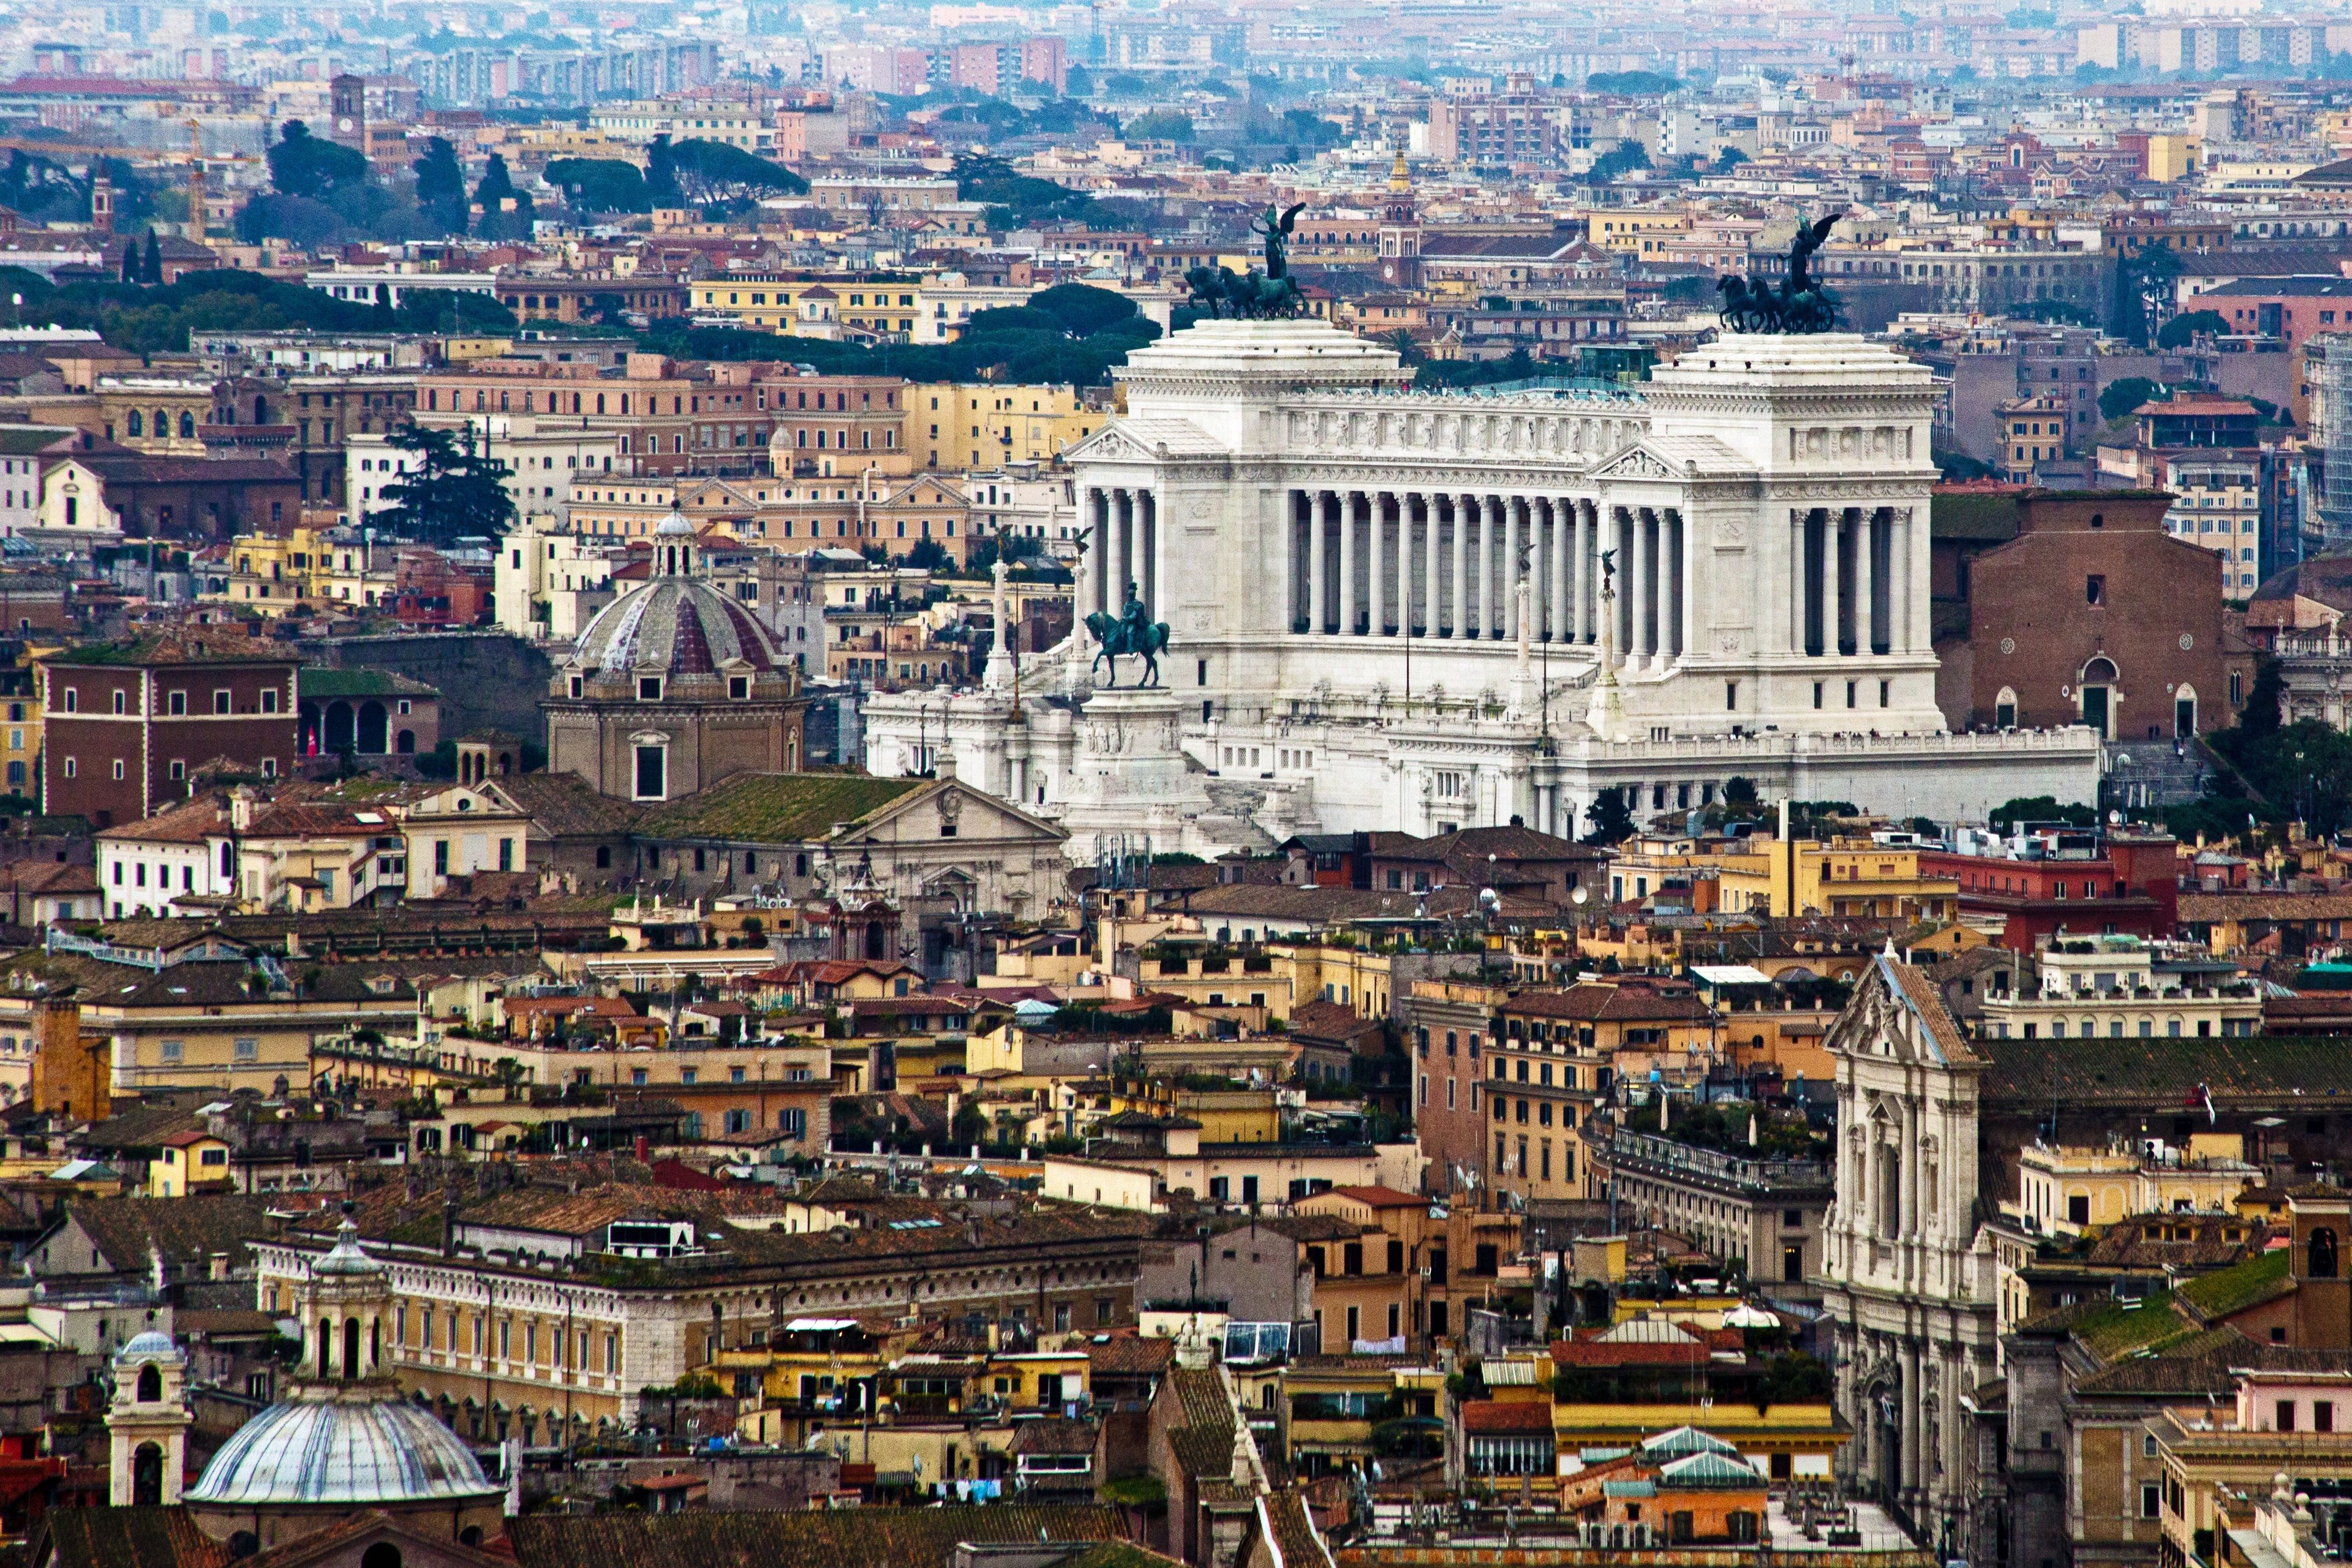 An aerial view of the Victor Emmanuel monument in Rome, Italy.